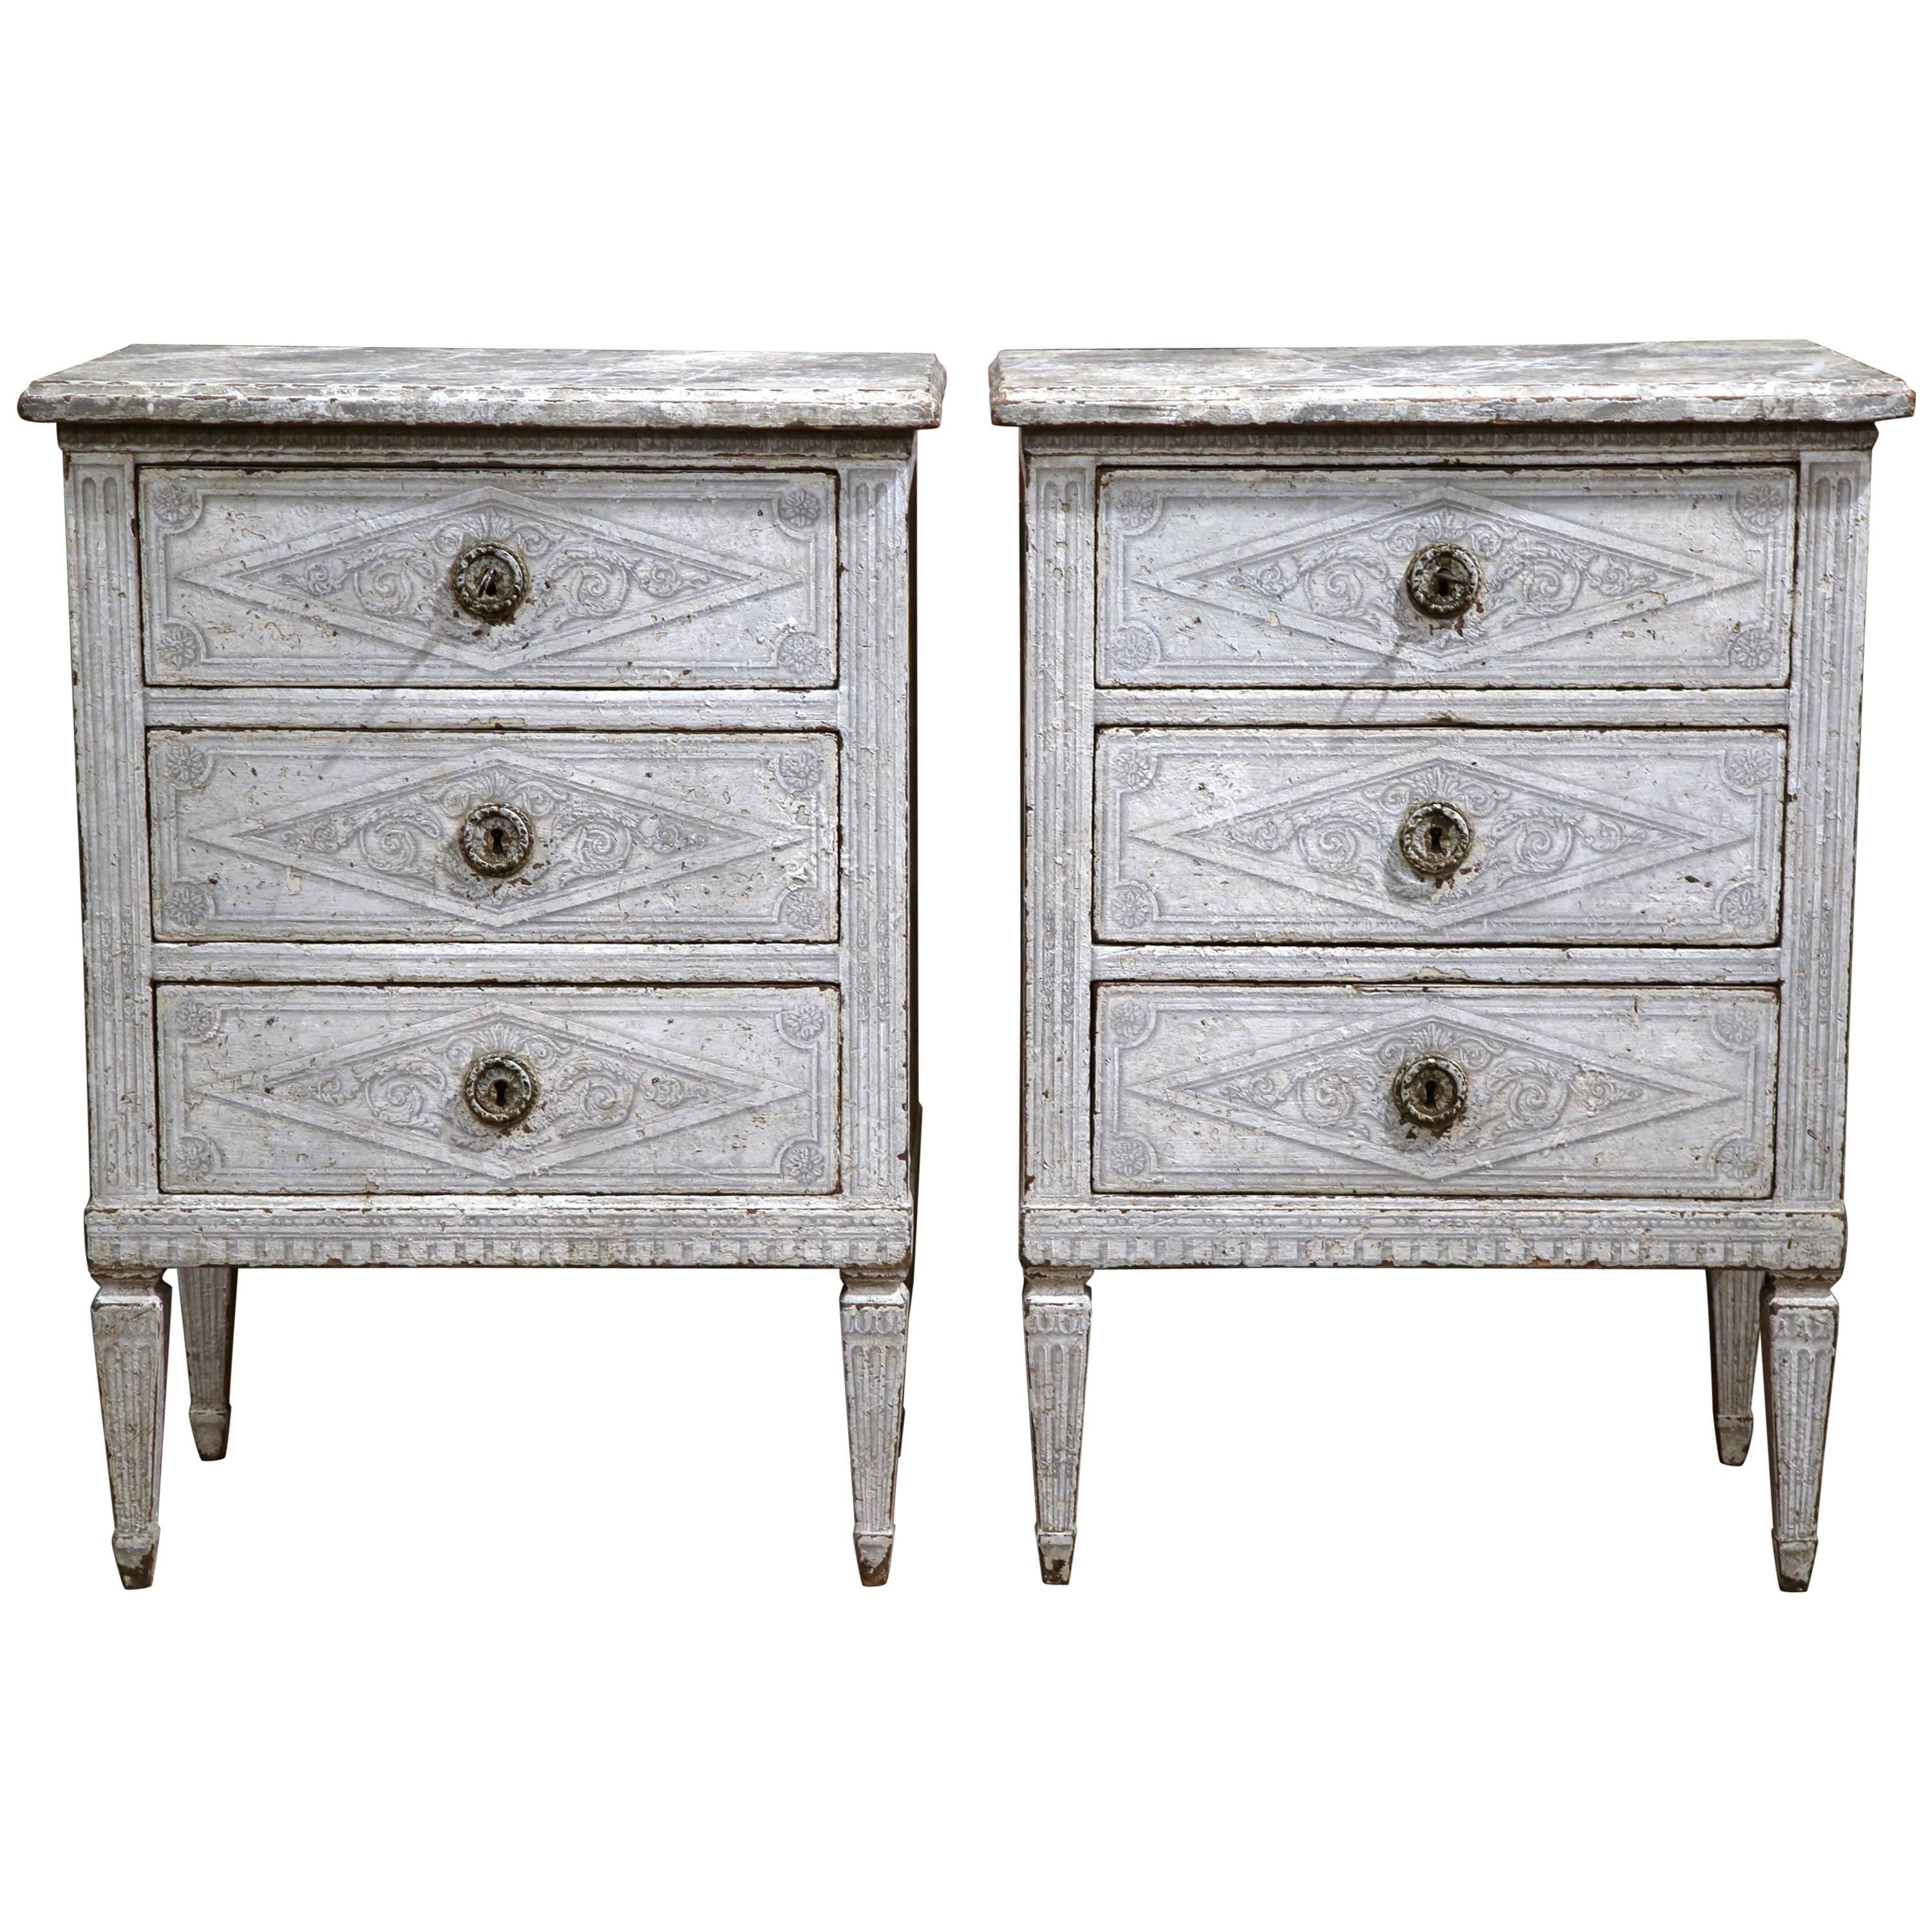 Pair of 19th Century French Louis XVI Painted Nightstands with Faux Marble Top